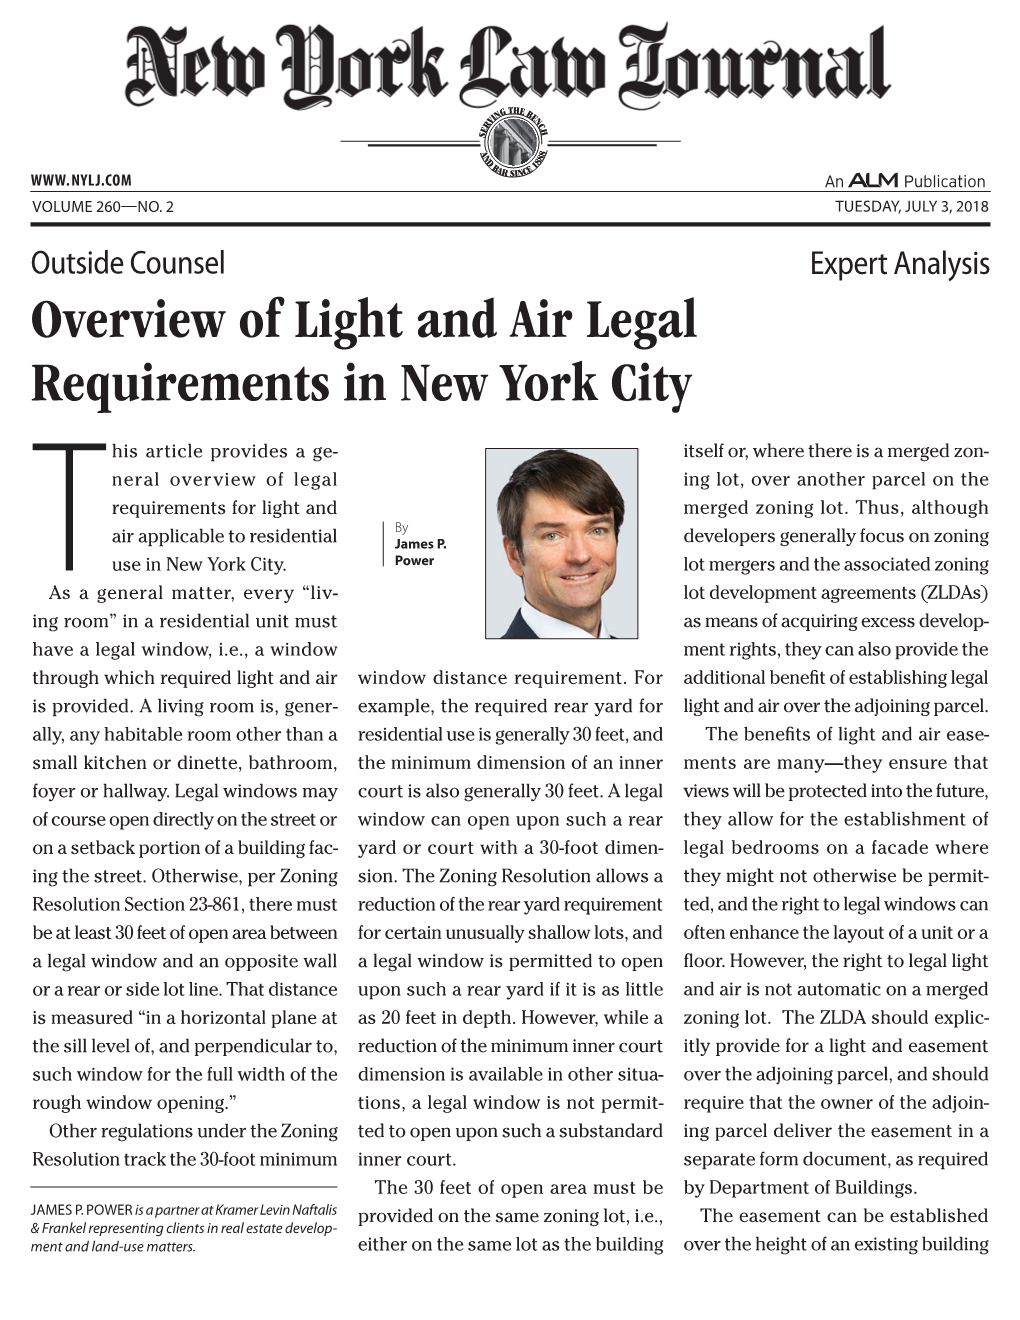 Overview of Light and Air Legal Requirements in New York City